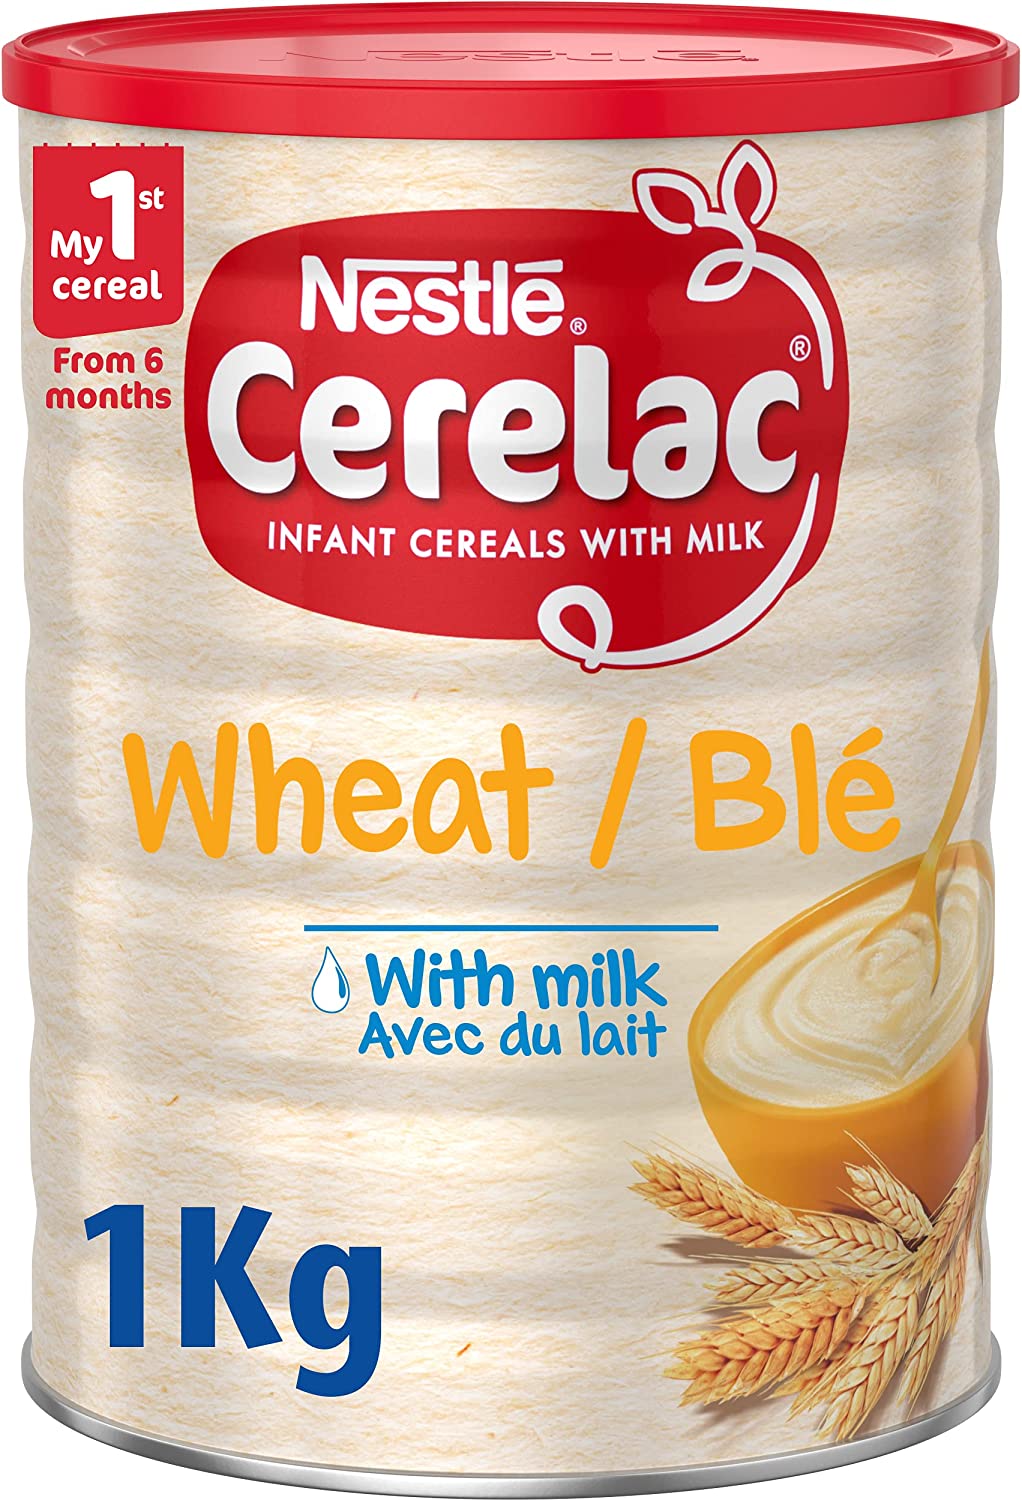 Nestle Cerelac Wheat Infant Cereal with Milk, 6 months plus, 1kg